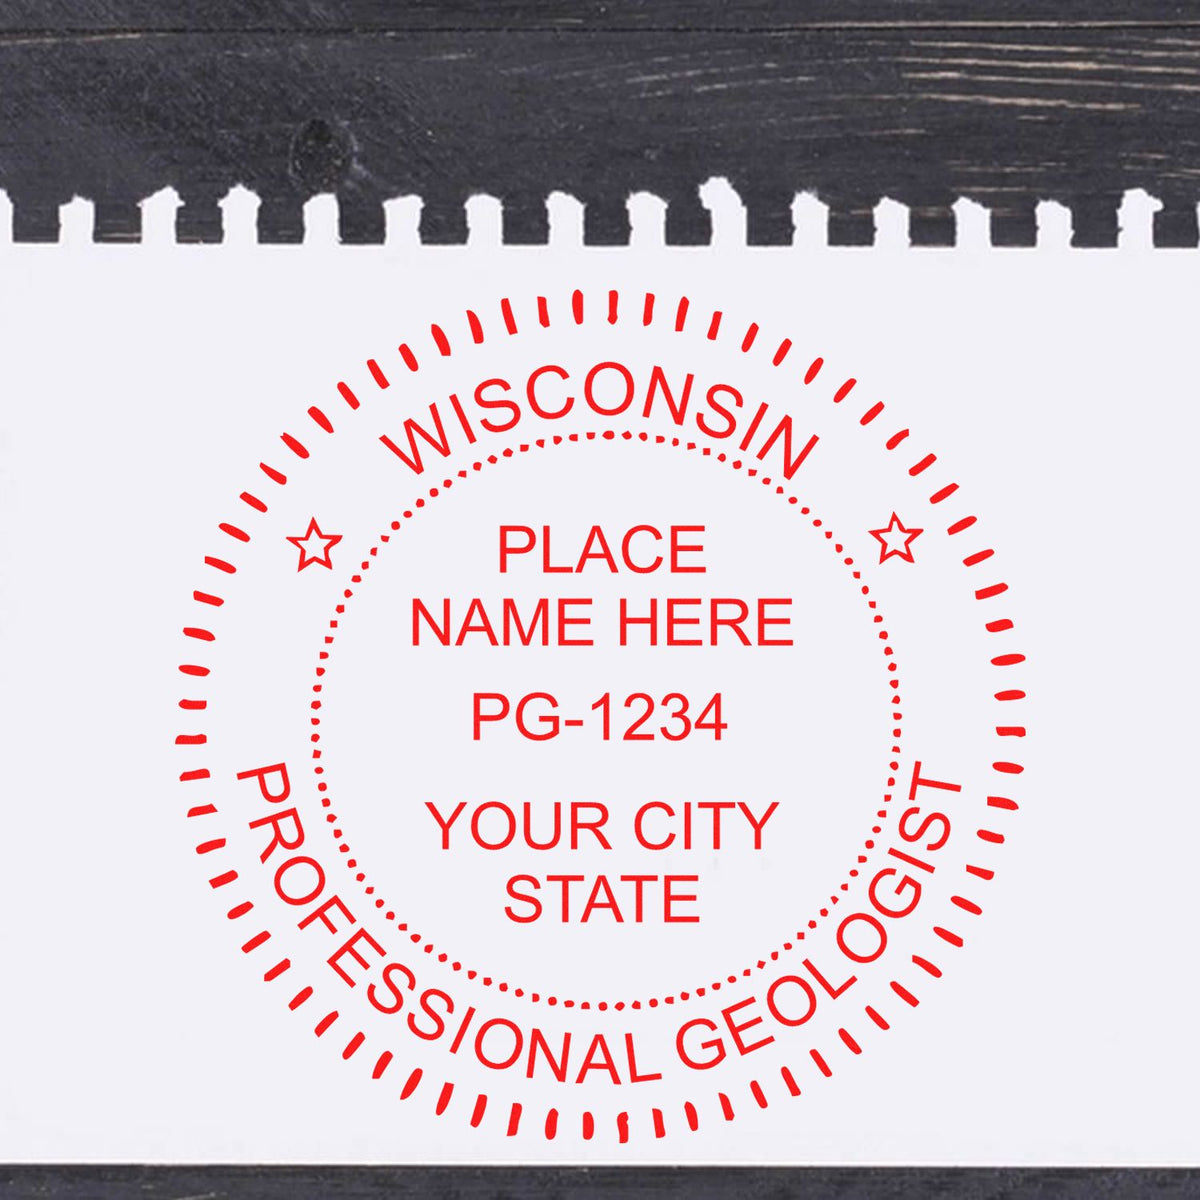 The Premium MaxLight Pre-Inked Wisconsin Geology Stamp stamp impression comes to life with a crisp, detailed image stamped on paper - showcasing true professional quality.